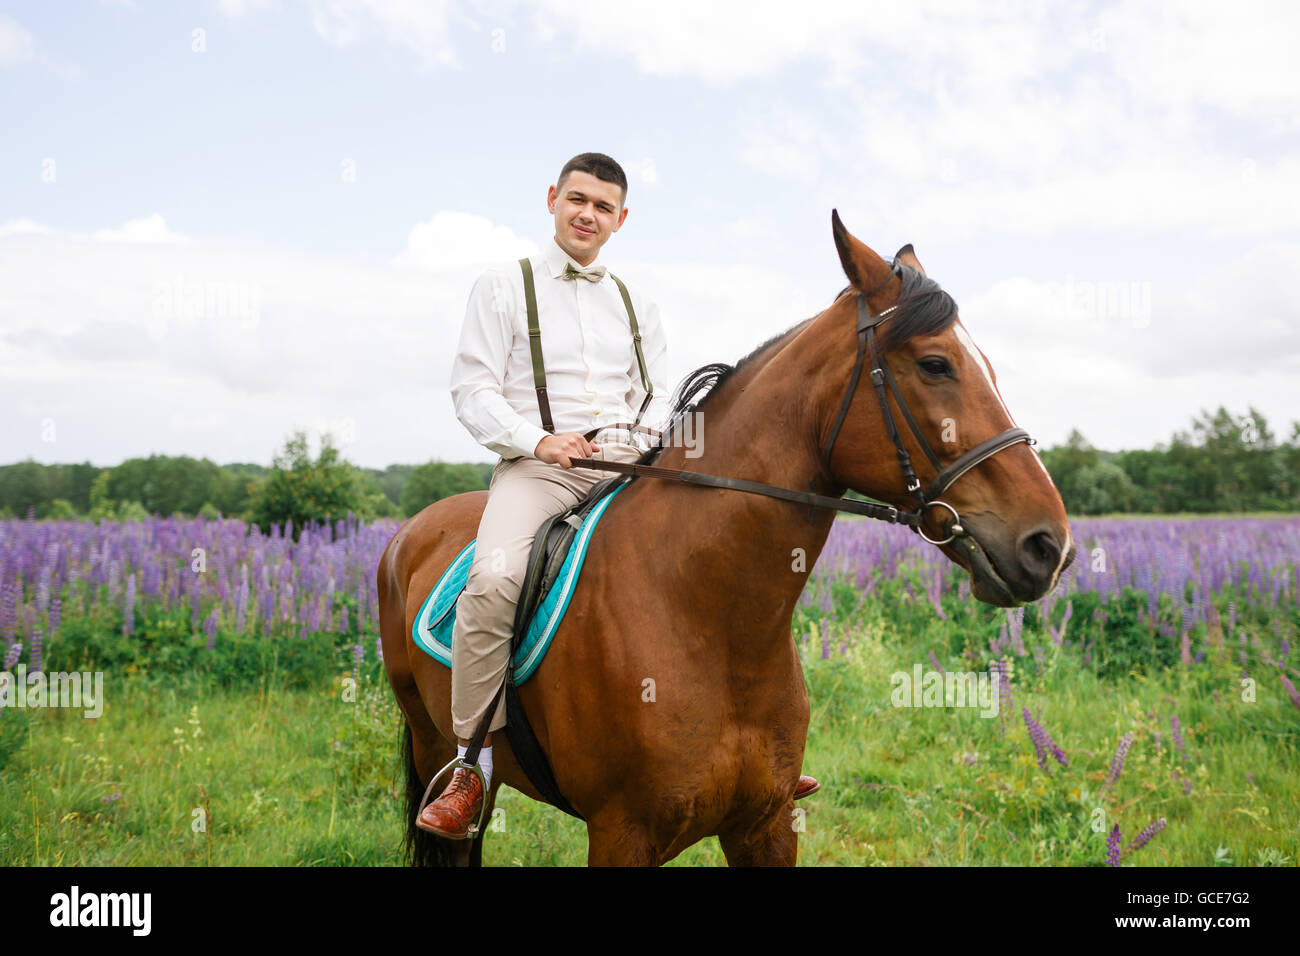 The groom riding on horseback across a field of lupine Stock Photo